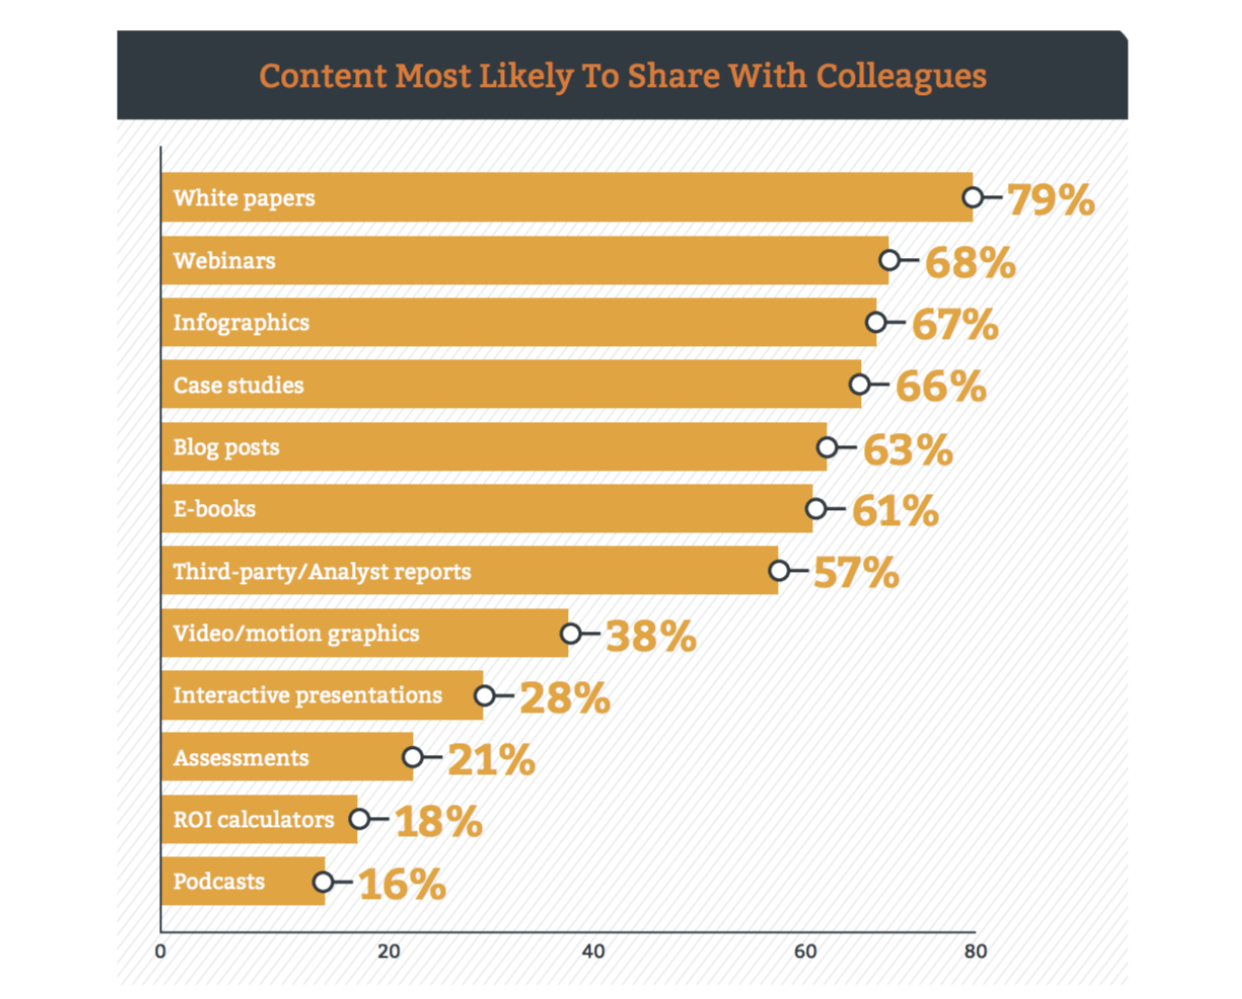 the most share-worthy content types are white papers, webinars, infographics, and case studies.